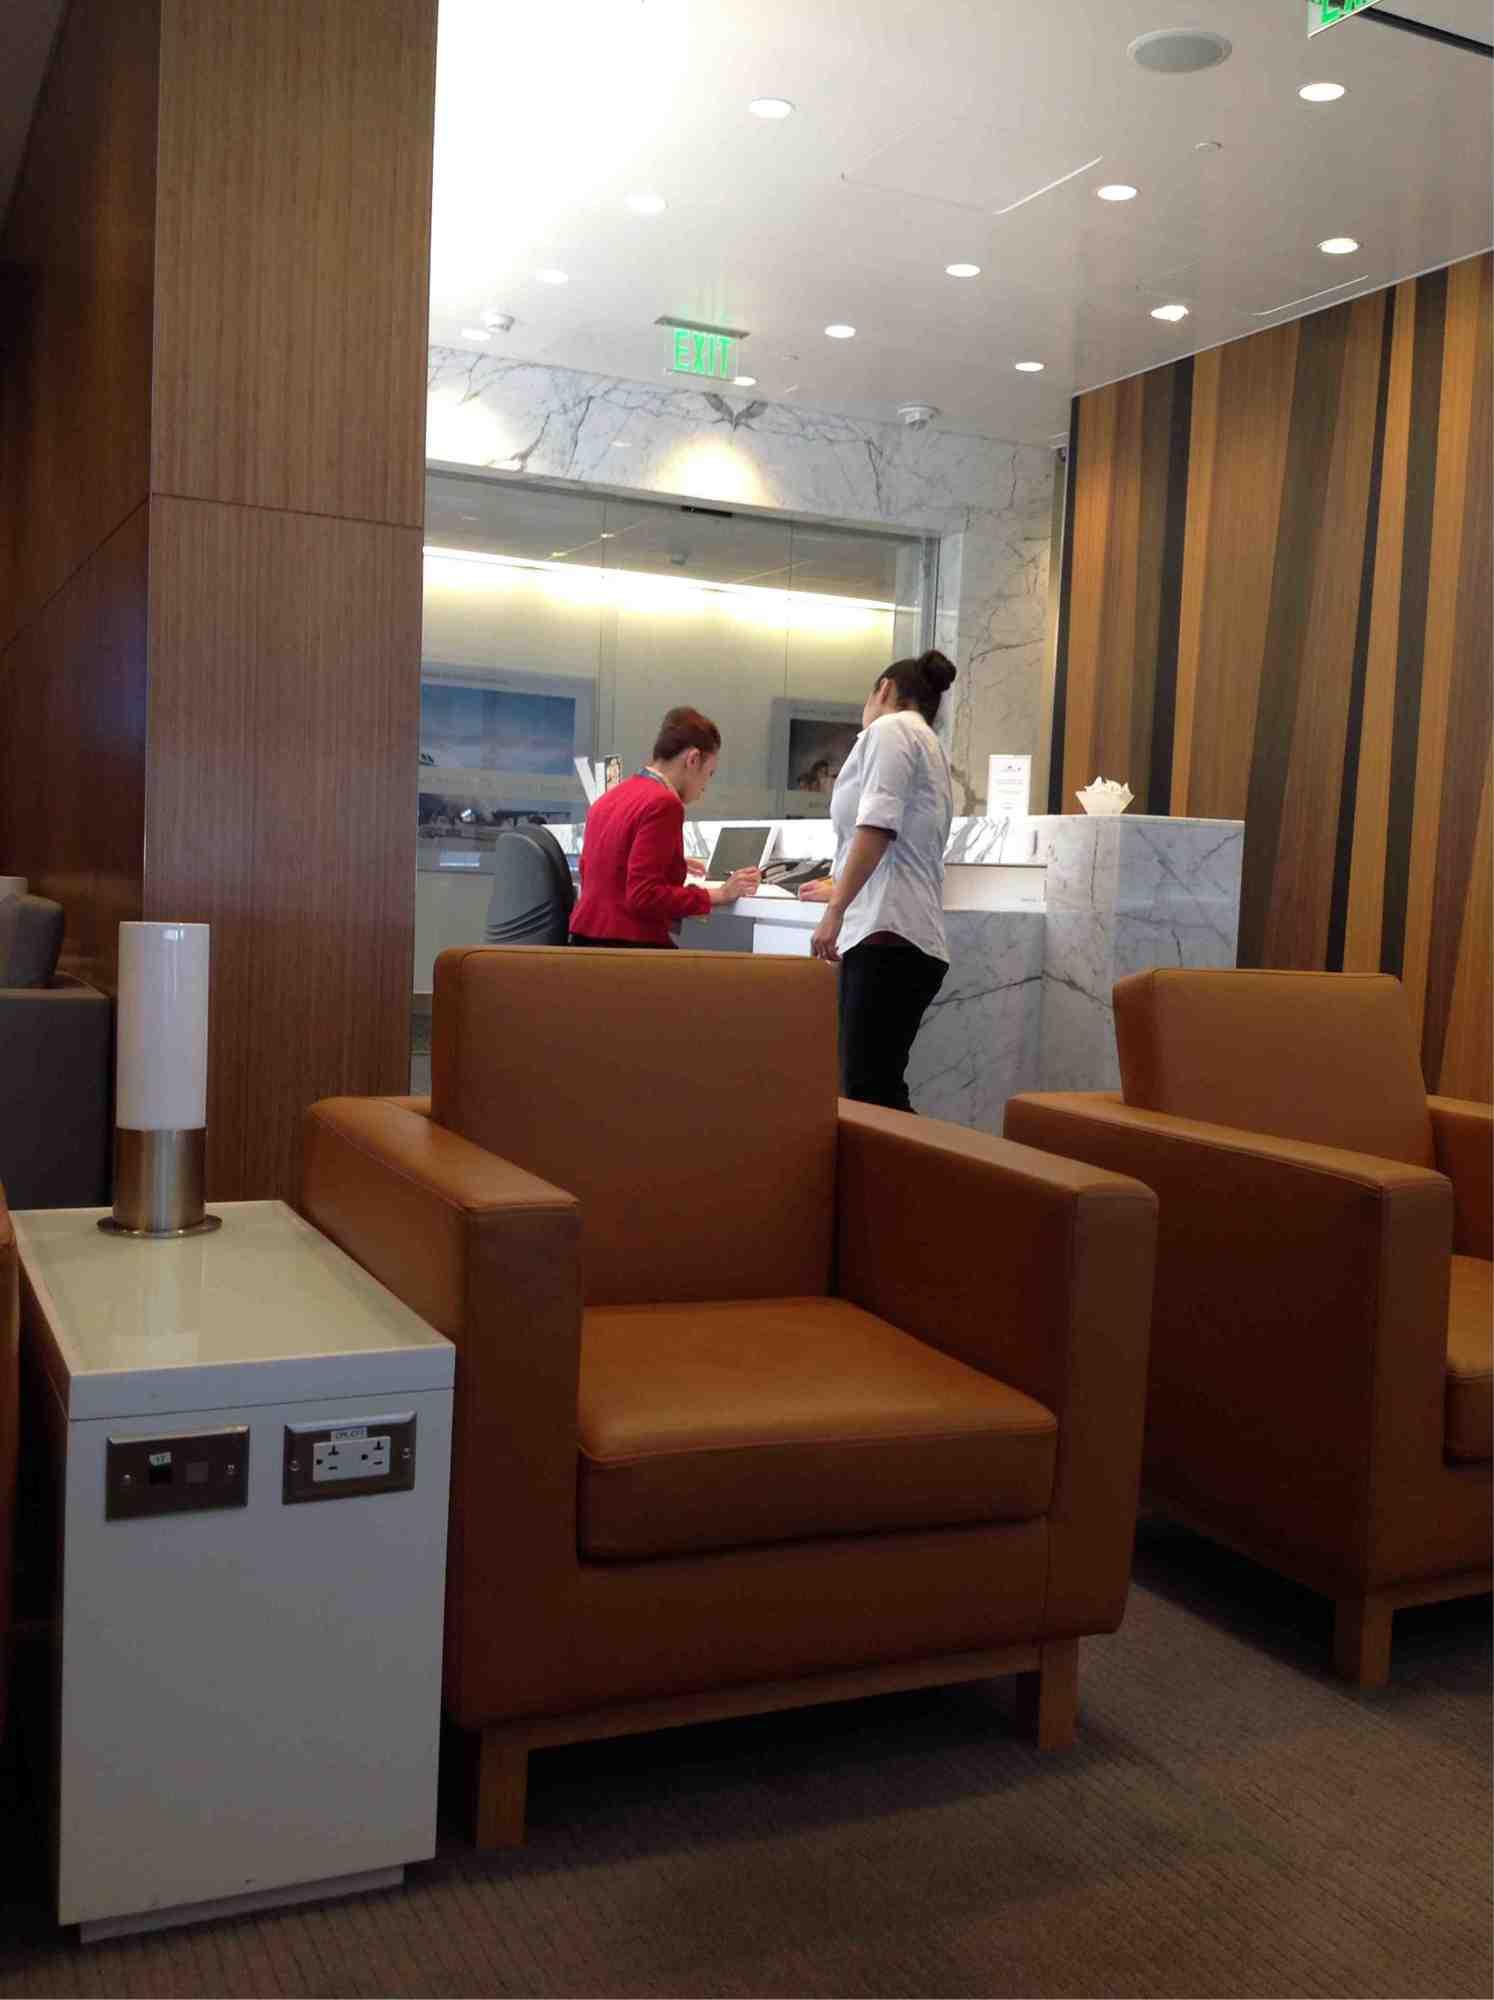 Cathay Pacific First and Business Class Lounge image 12 of 74